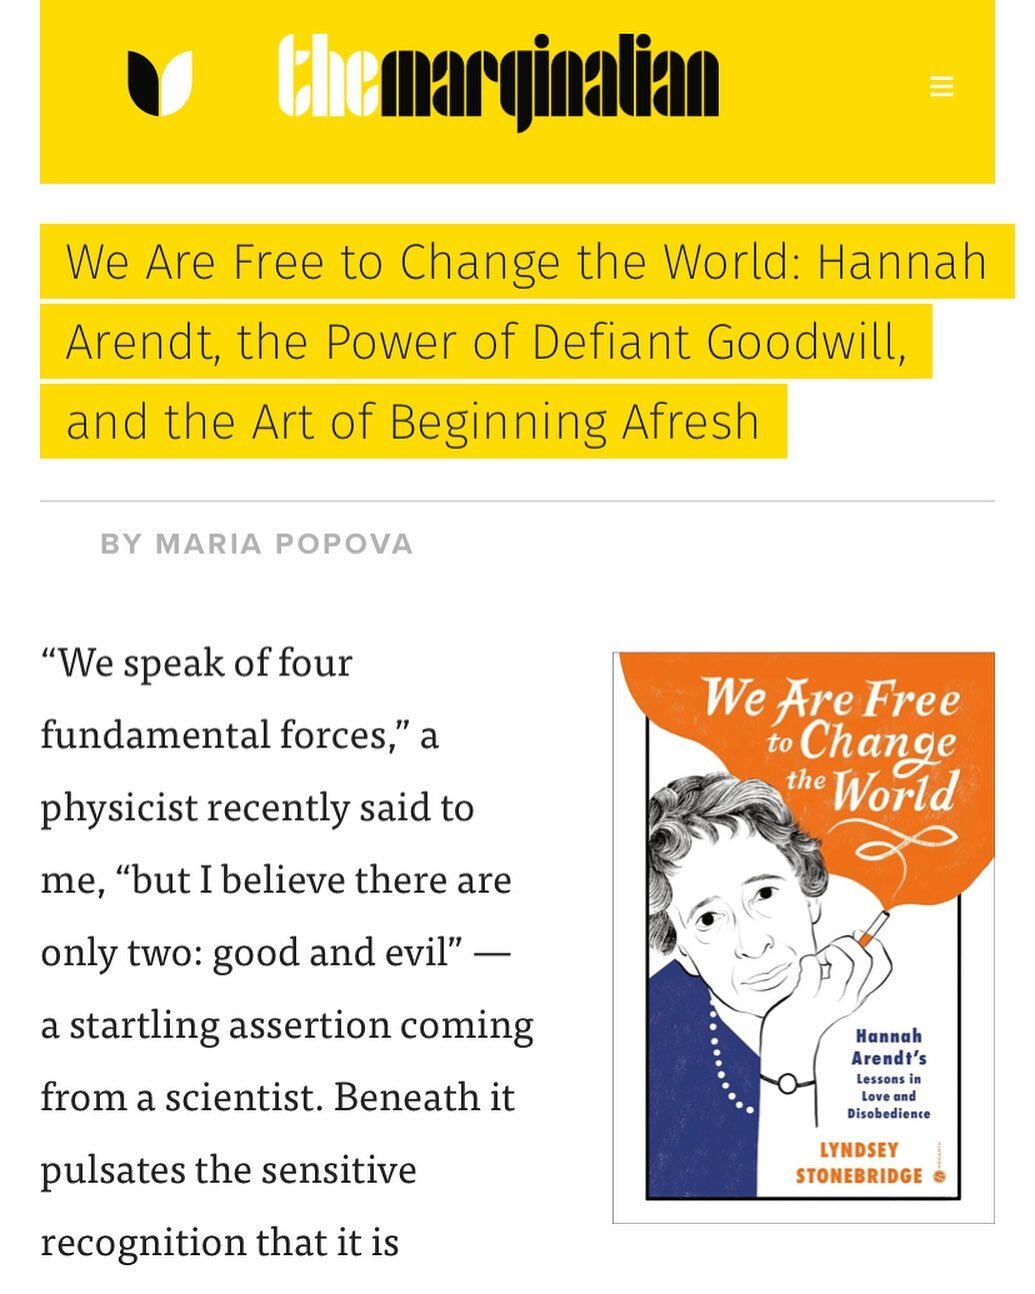 &ldquo;Arendt&rsquo;s rigorously reasoned, boundlessly mobilizing defiance of helplessness and &ldquo;the stubborn humanity of her fierce and complex creativity&rdquo; come abloom in We Are Free to Change the World: Hannah Arendt&rsquo;s Lessons in L